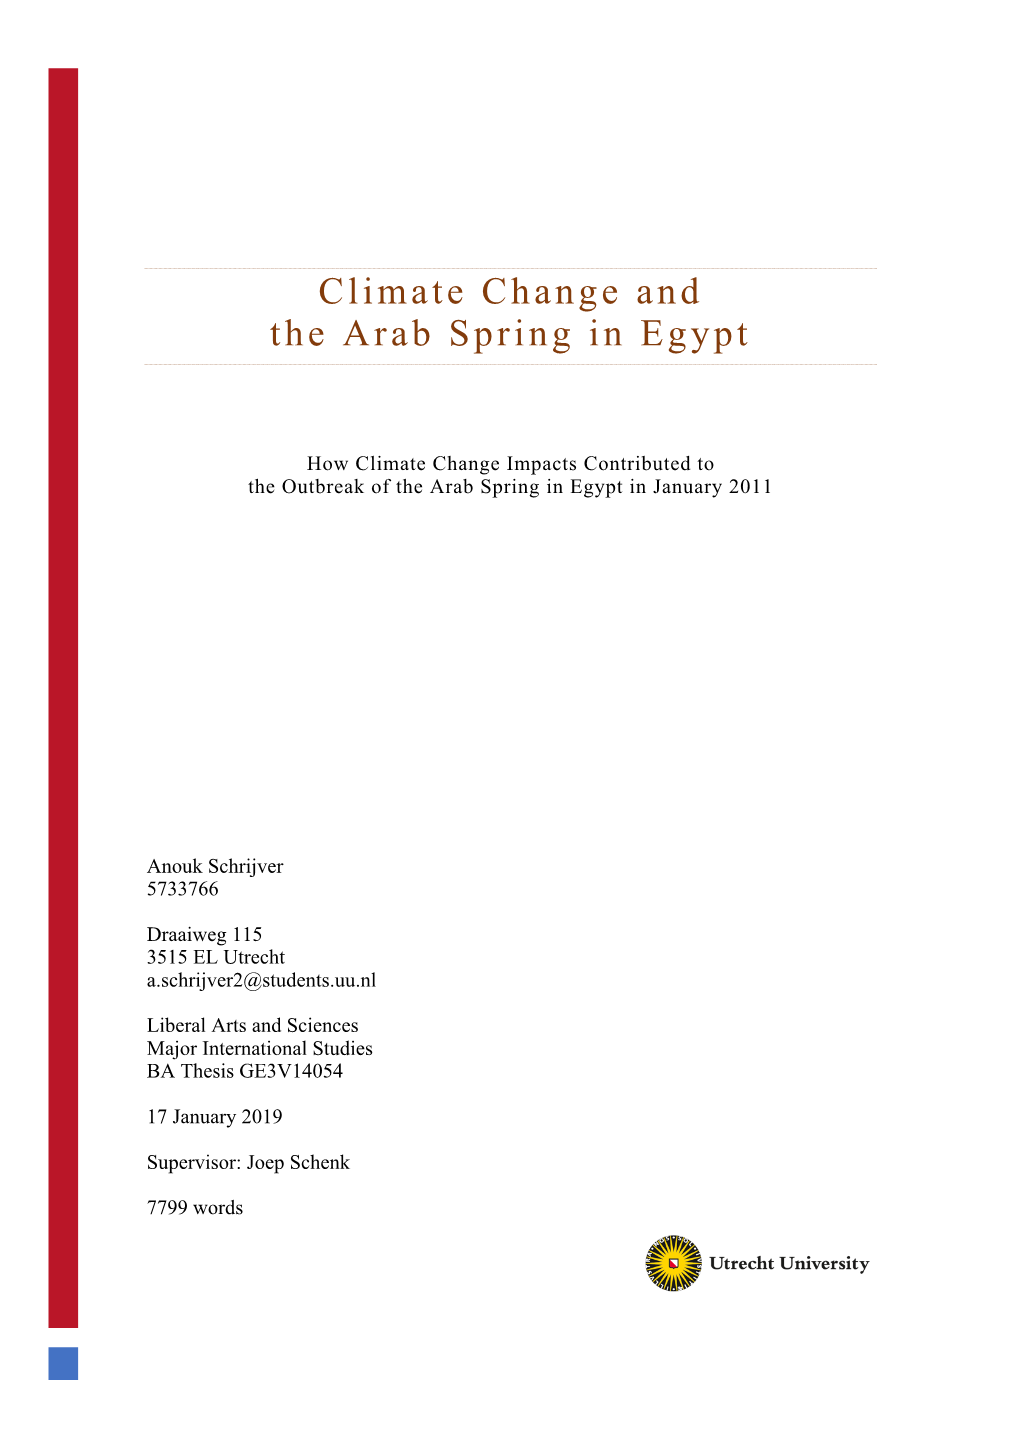 Climate Change and the Arab Spring in Egypt